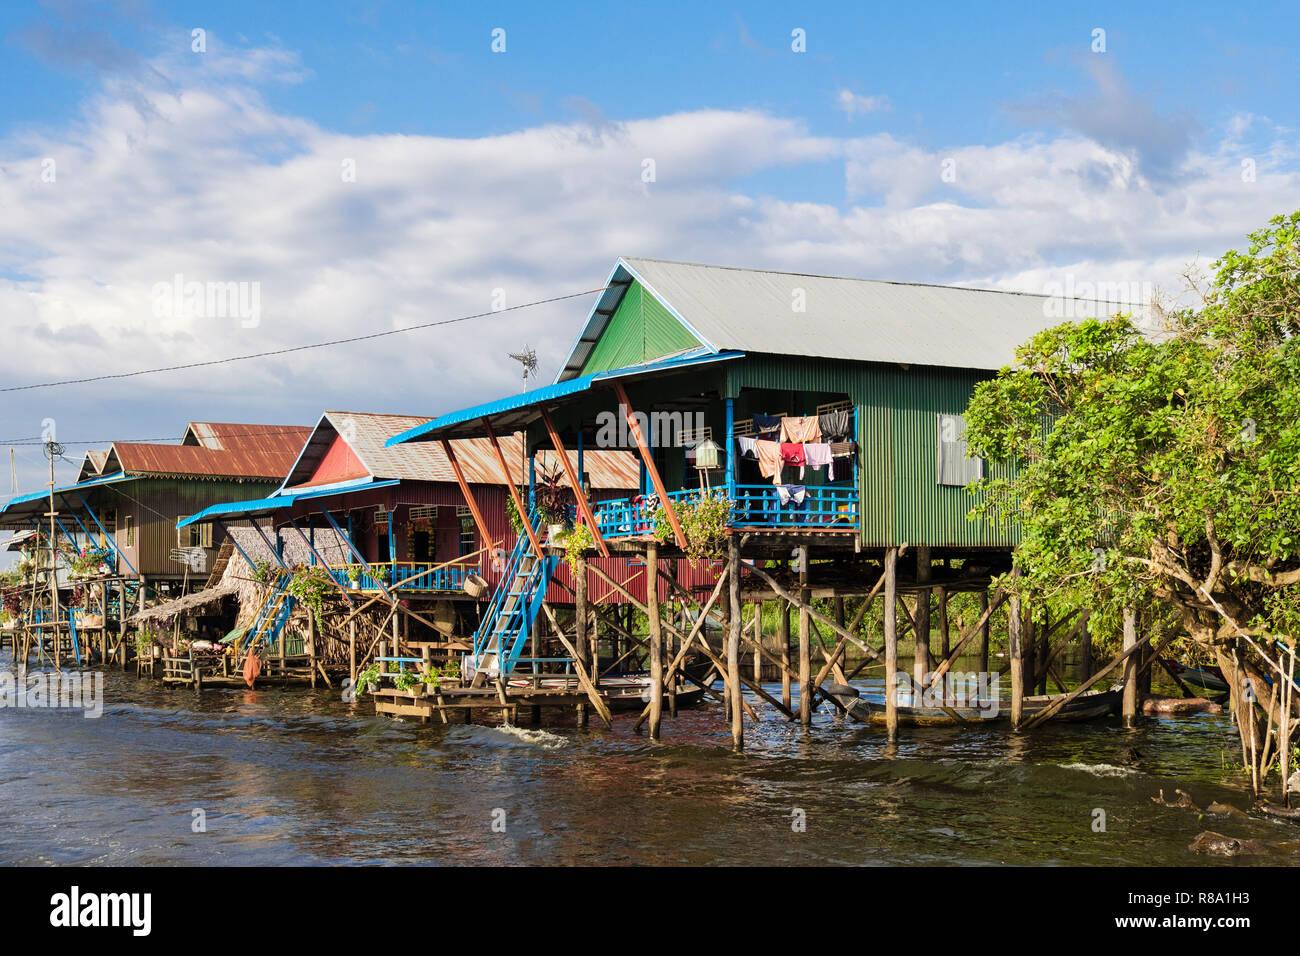 Houses on stilts in floating fishing village in Tonle Sap. Kampong Phluk, Siem Reap province, Cambodia, southeast Asia Stock Photo